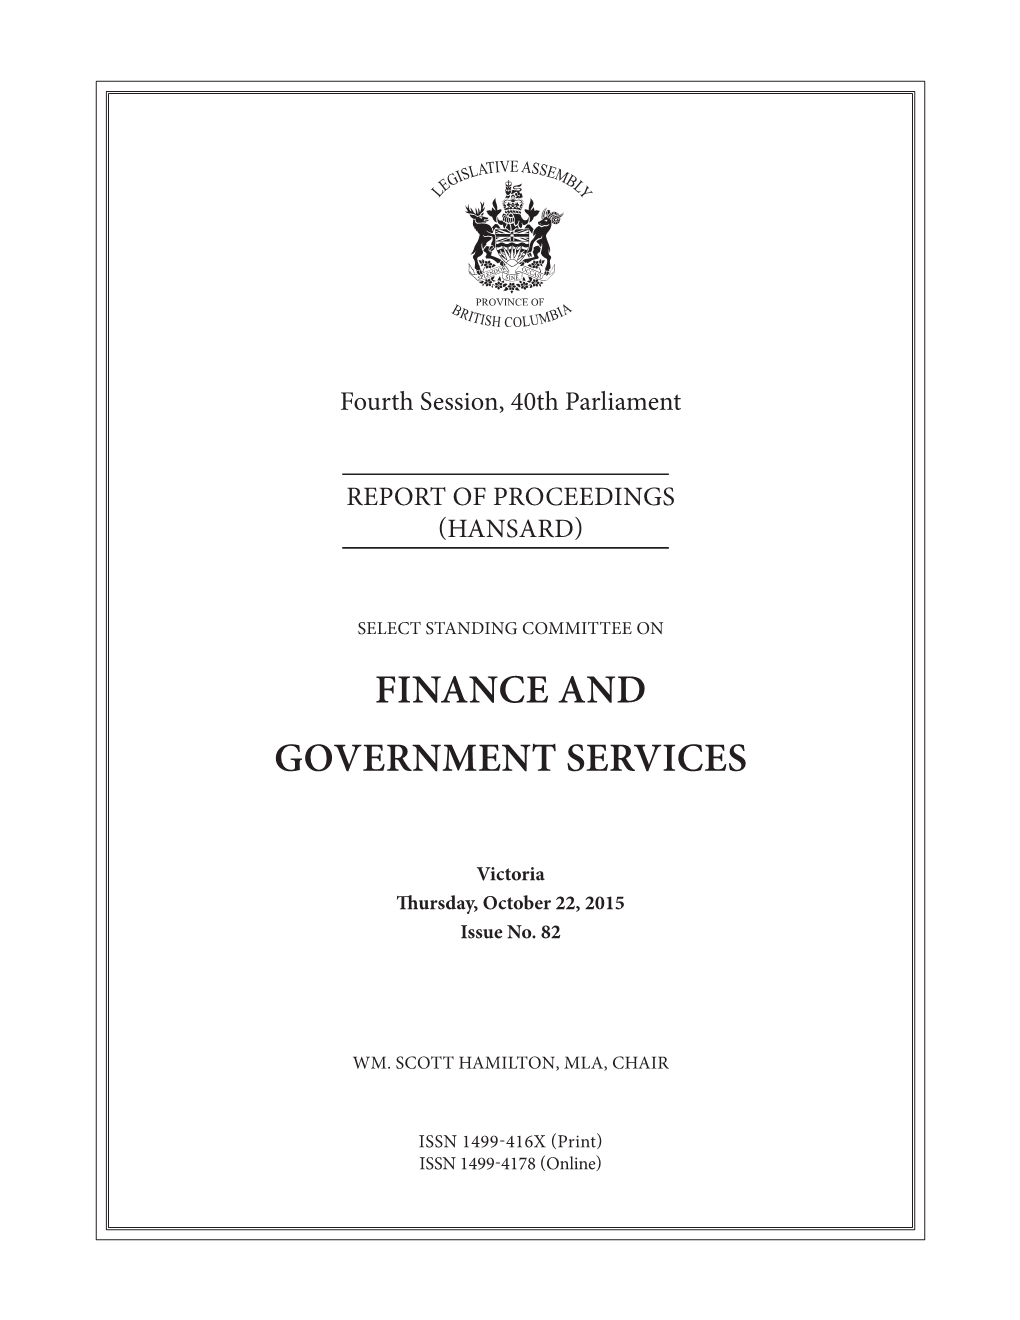 Finance and Government Services